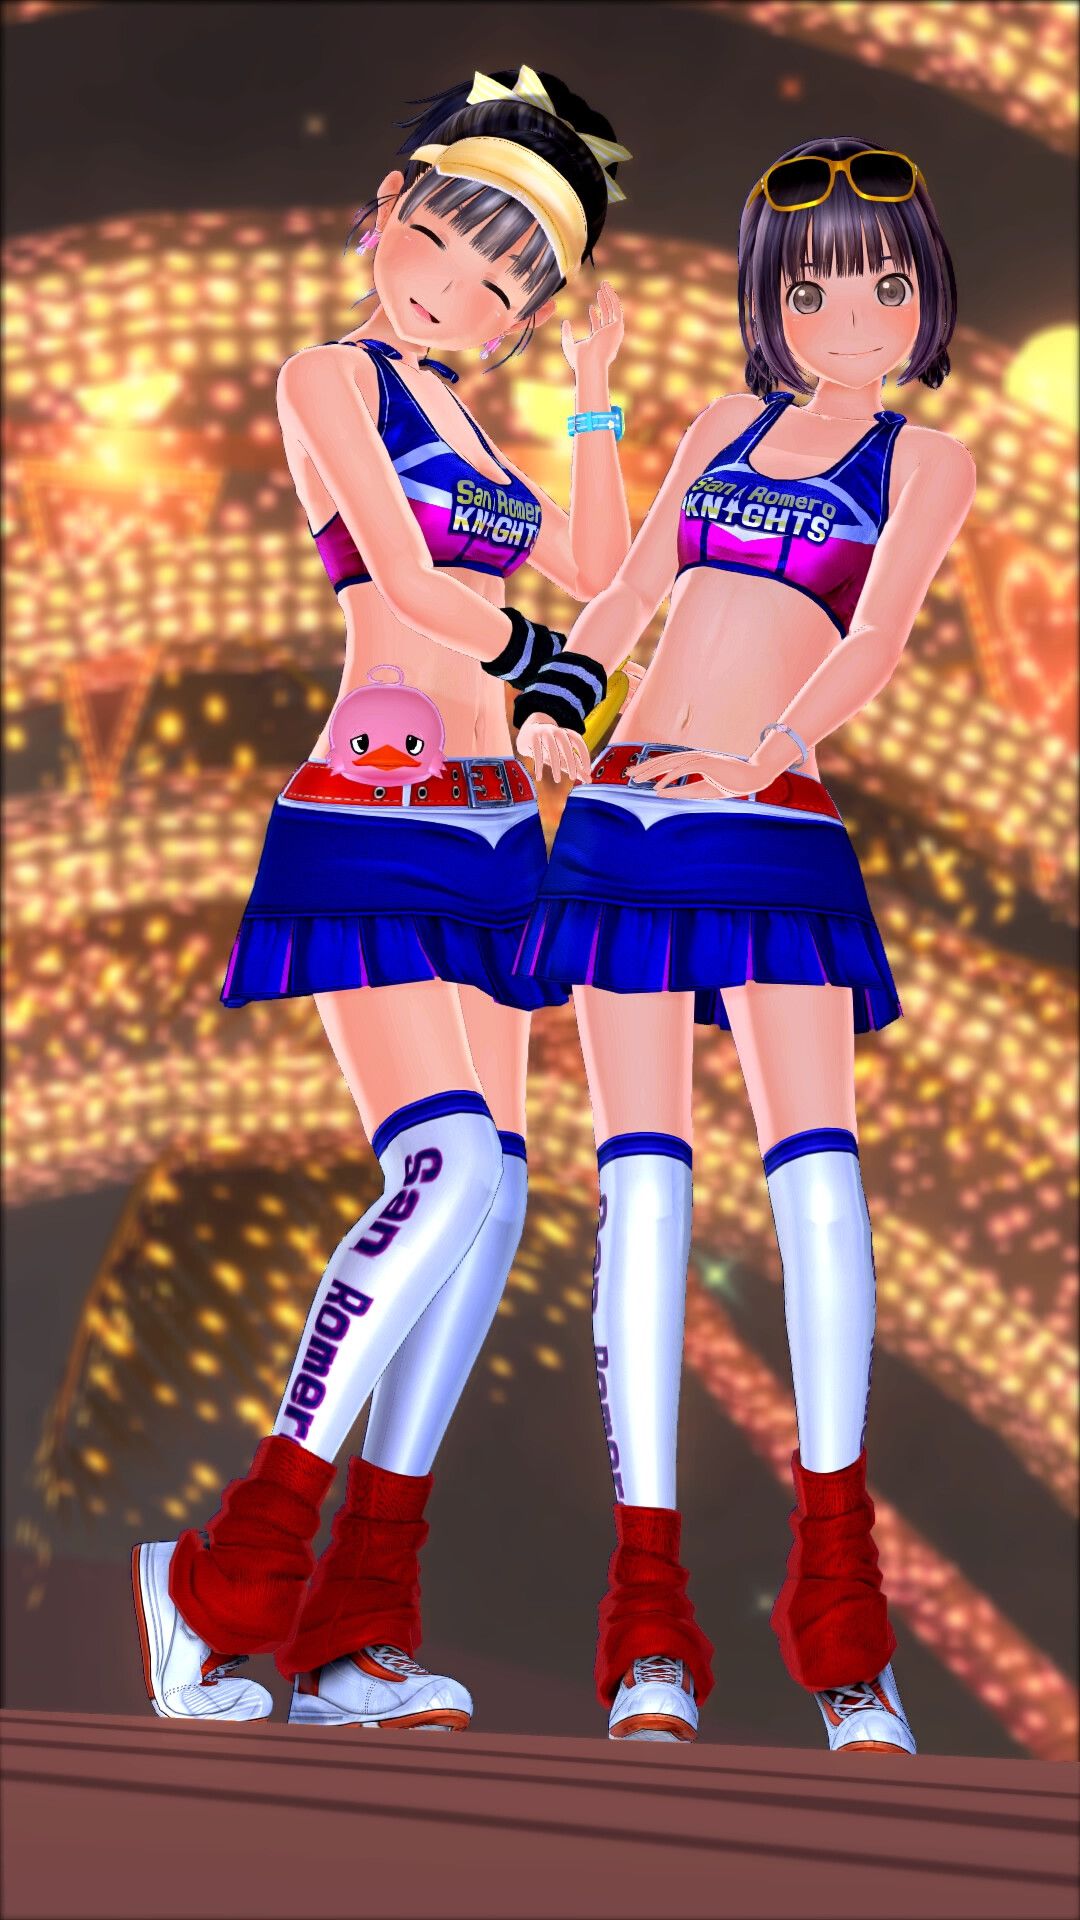 "LoveR" collaborated with "Lollipop Chainsaw" to implement a unique cheer costume! 15